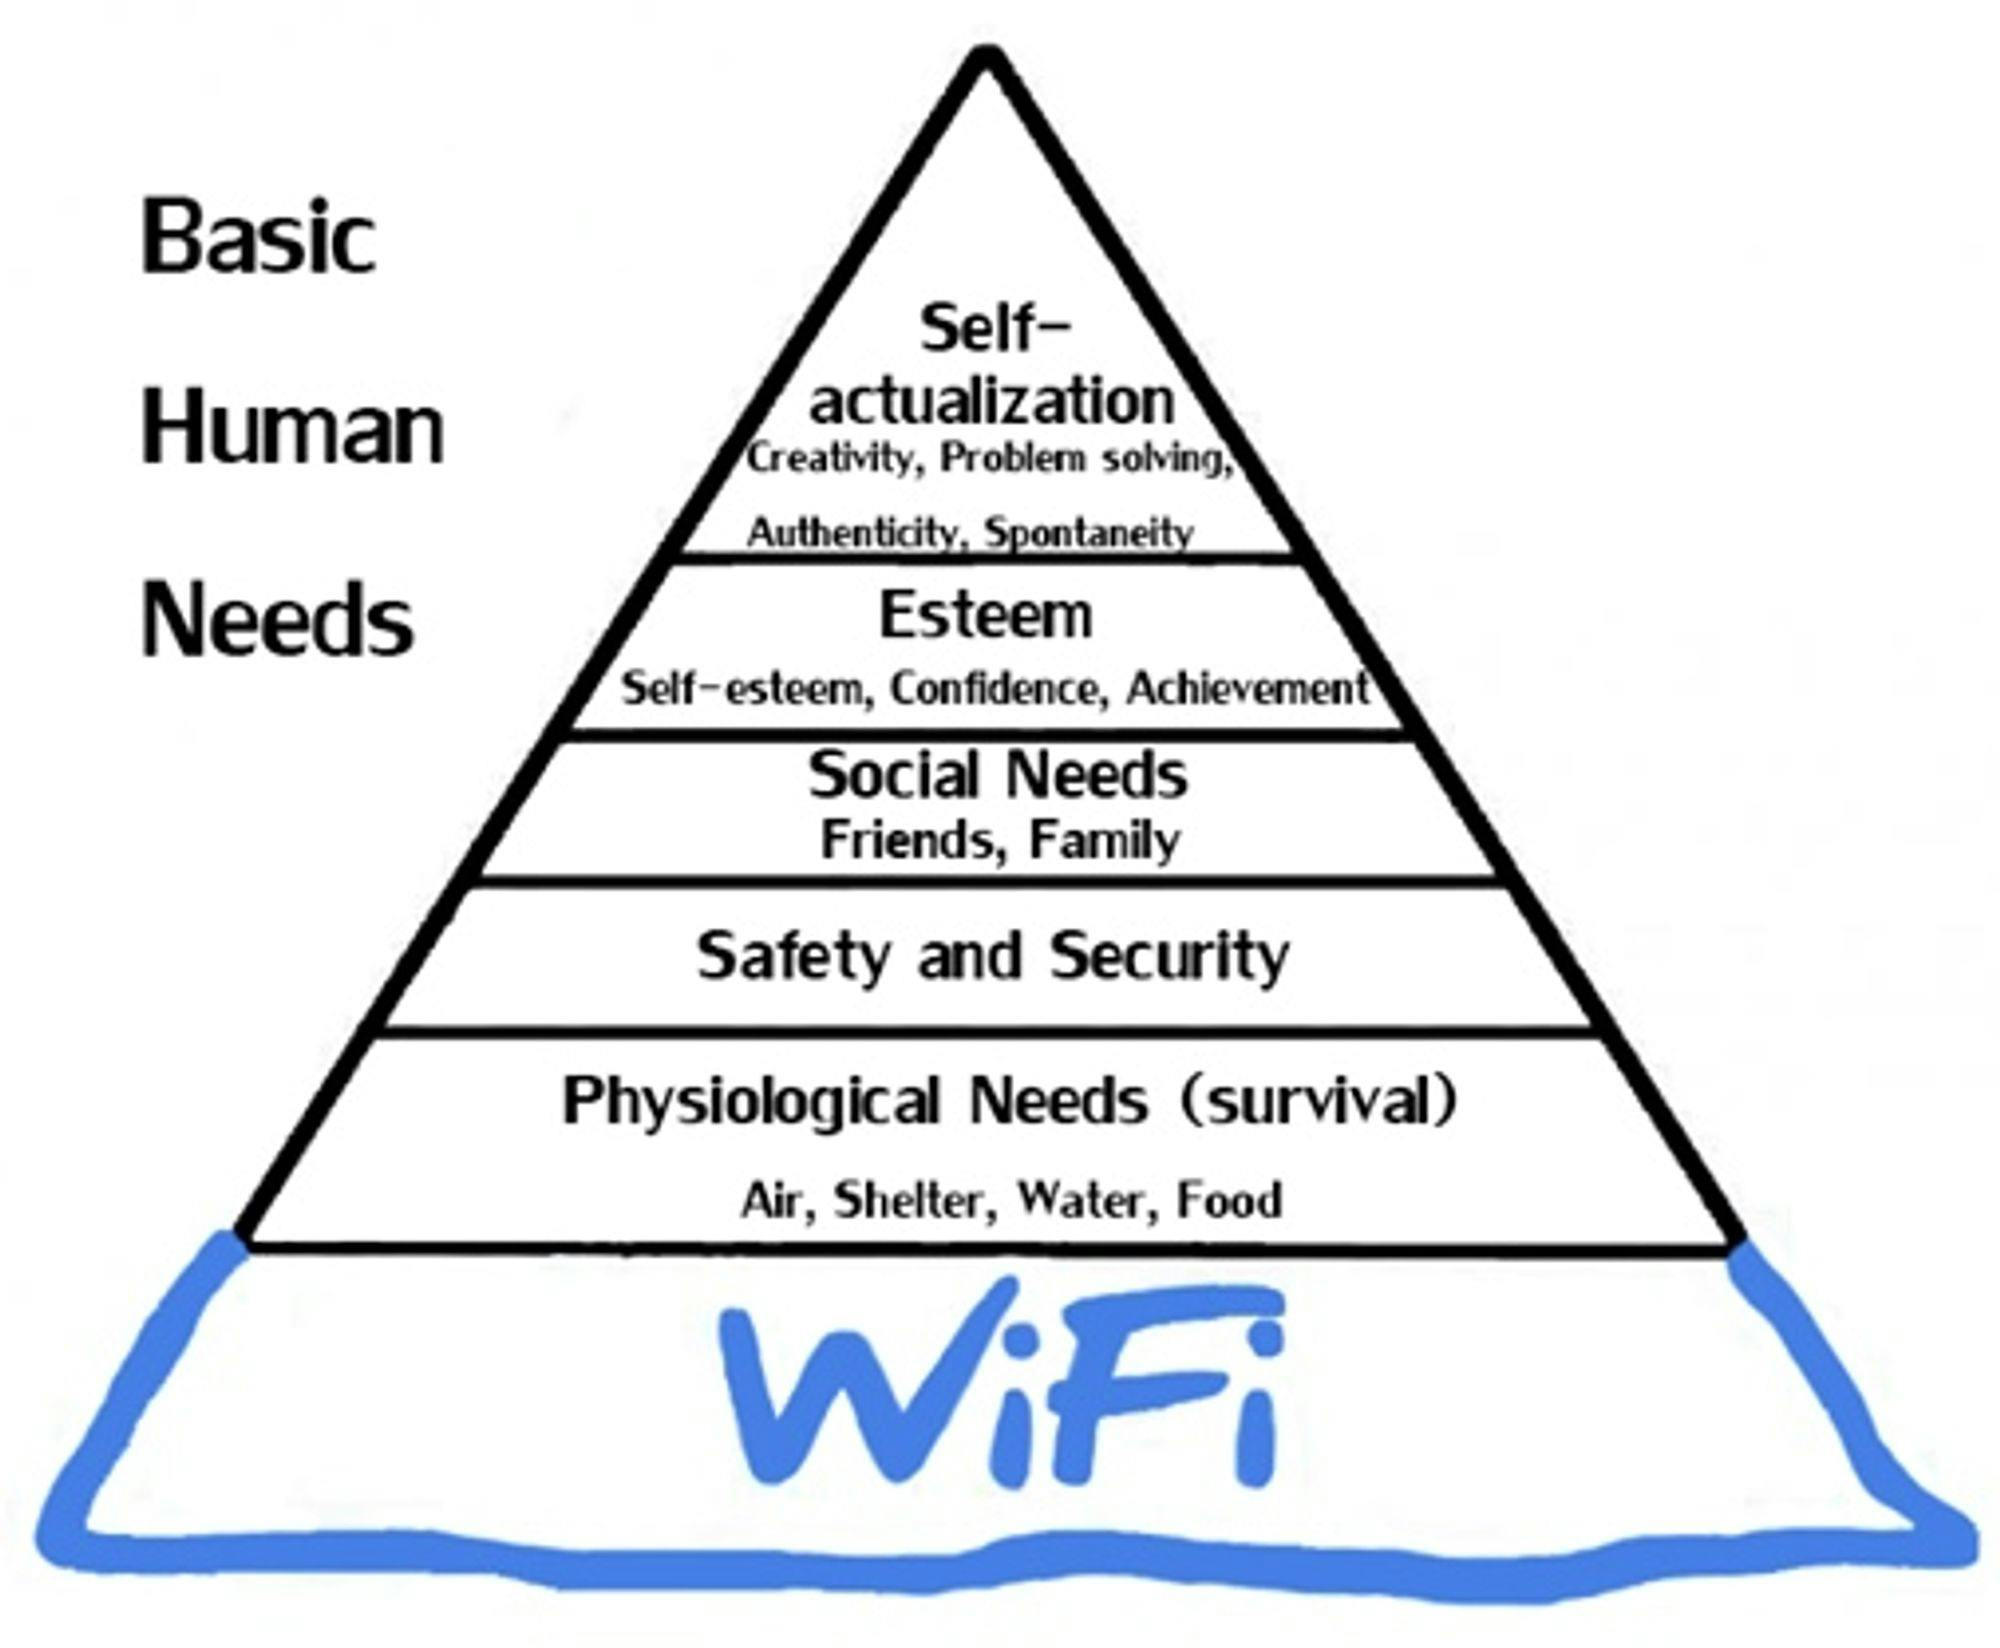 Maslow's Hierarchy of Needs - for the 21st Century